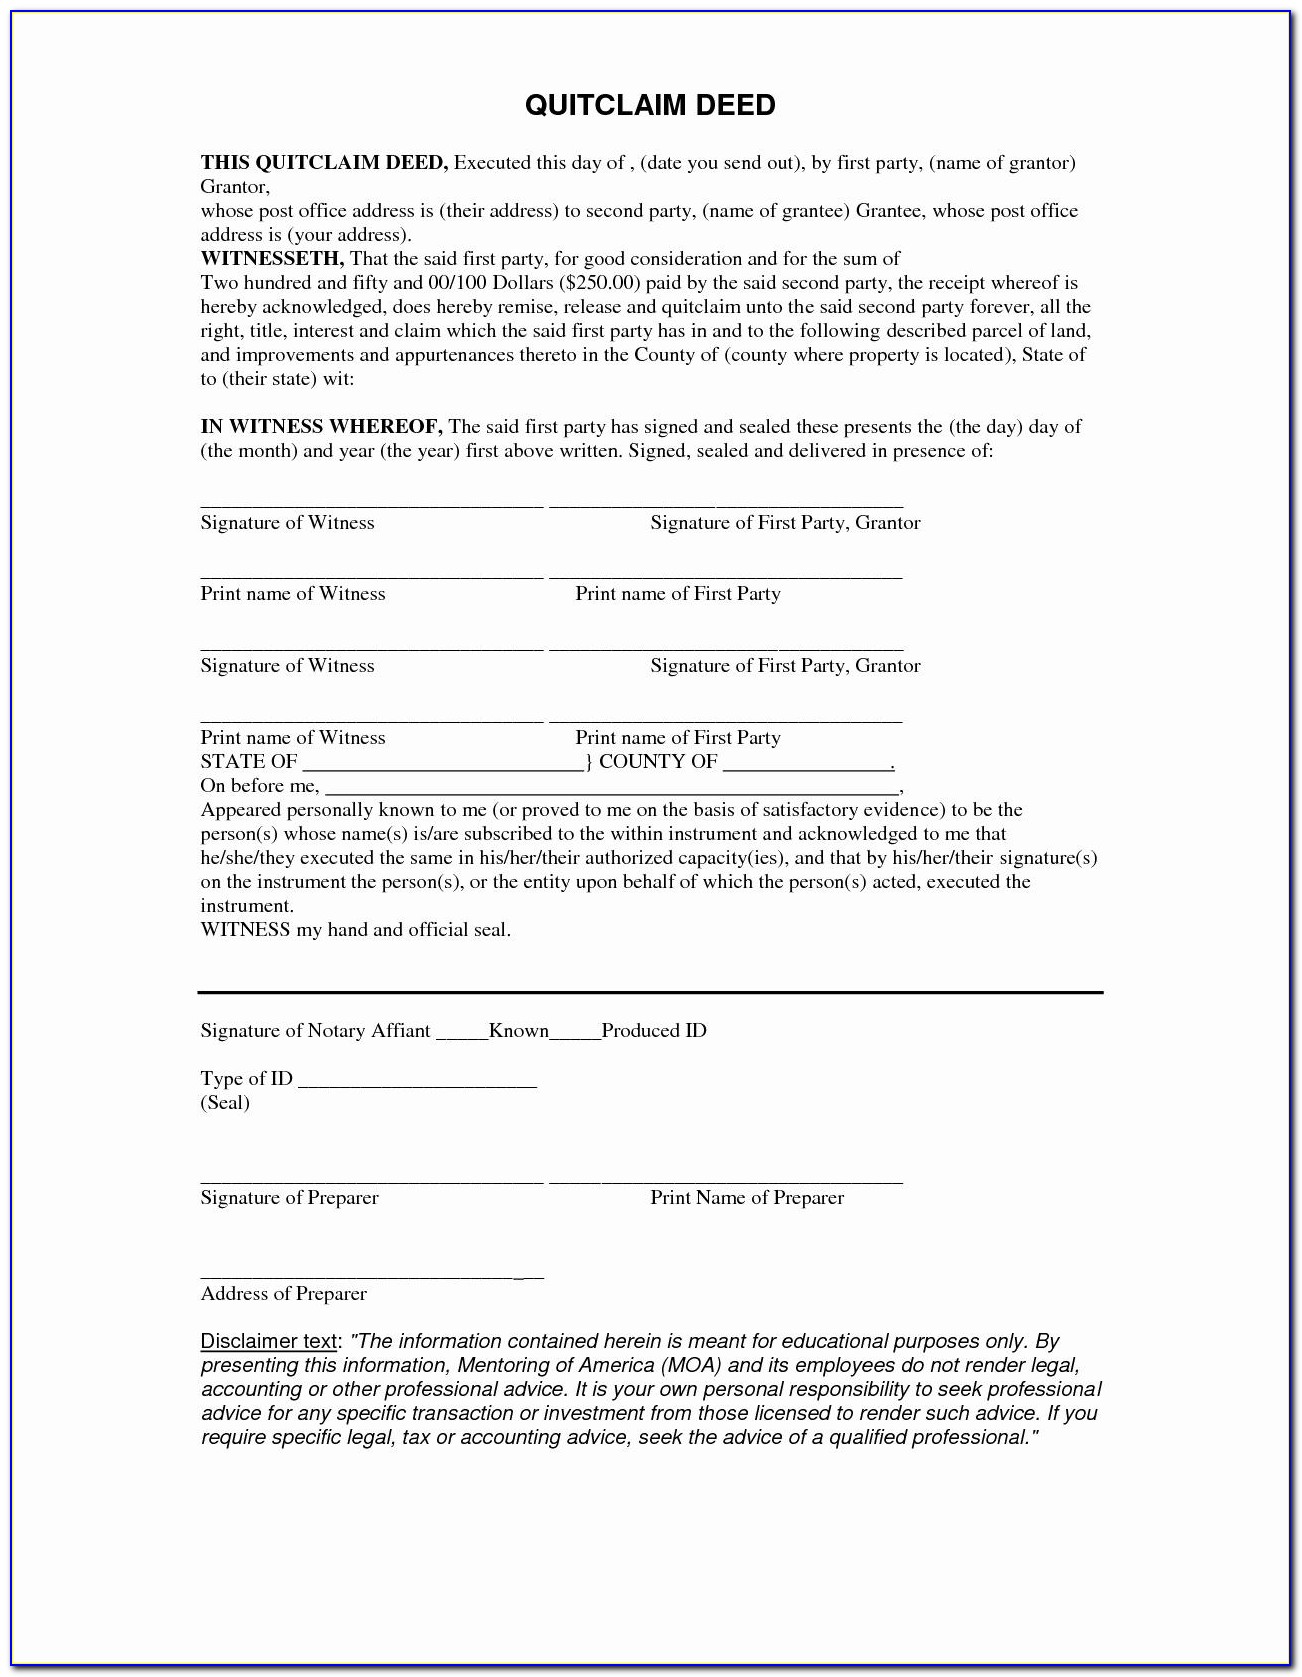 berrien-county-quit-claim-deed-form-printable-printable-forms-free-online